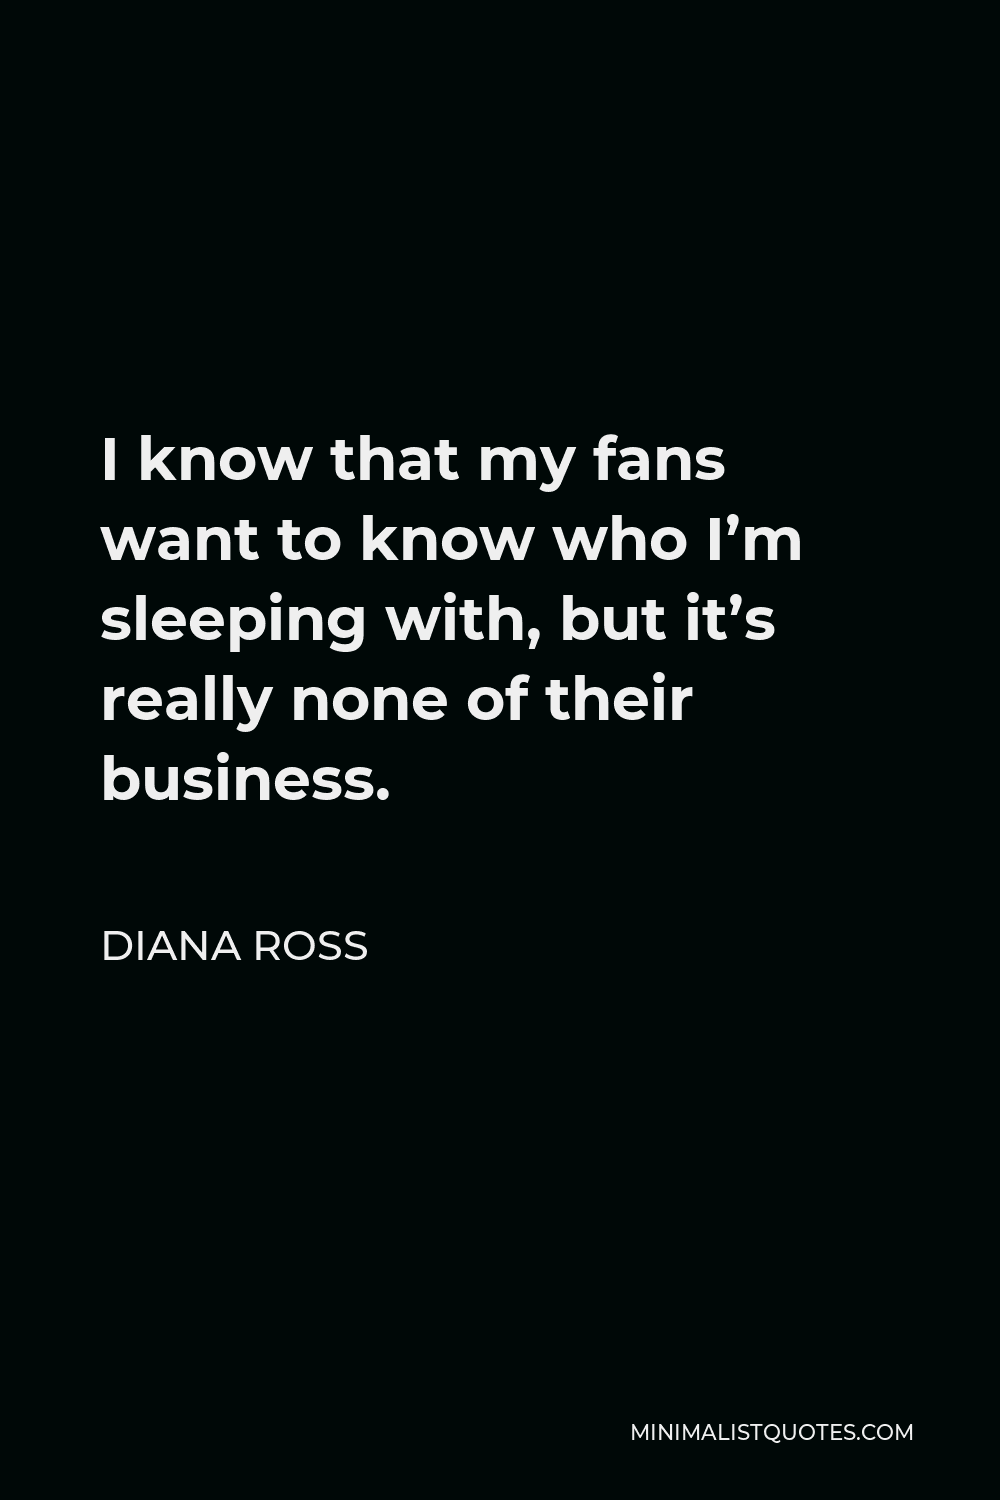 Diana Ross Quote - I know that my fans want to know who I’m sleeping with, but it’s really none of their business.